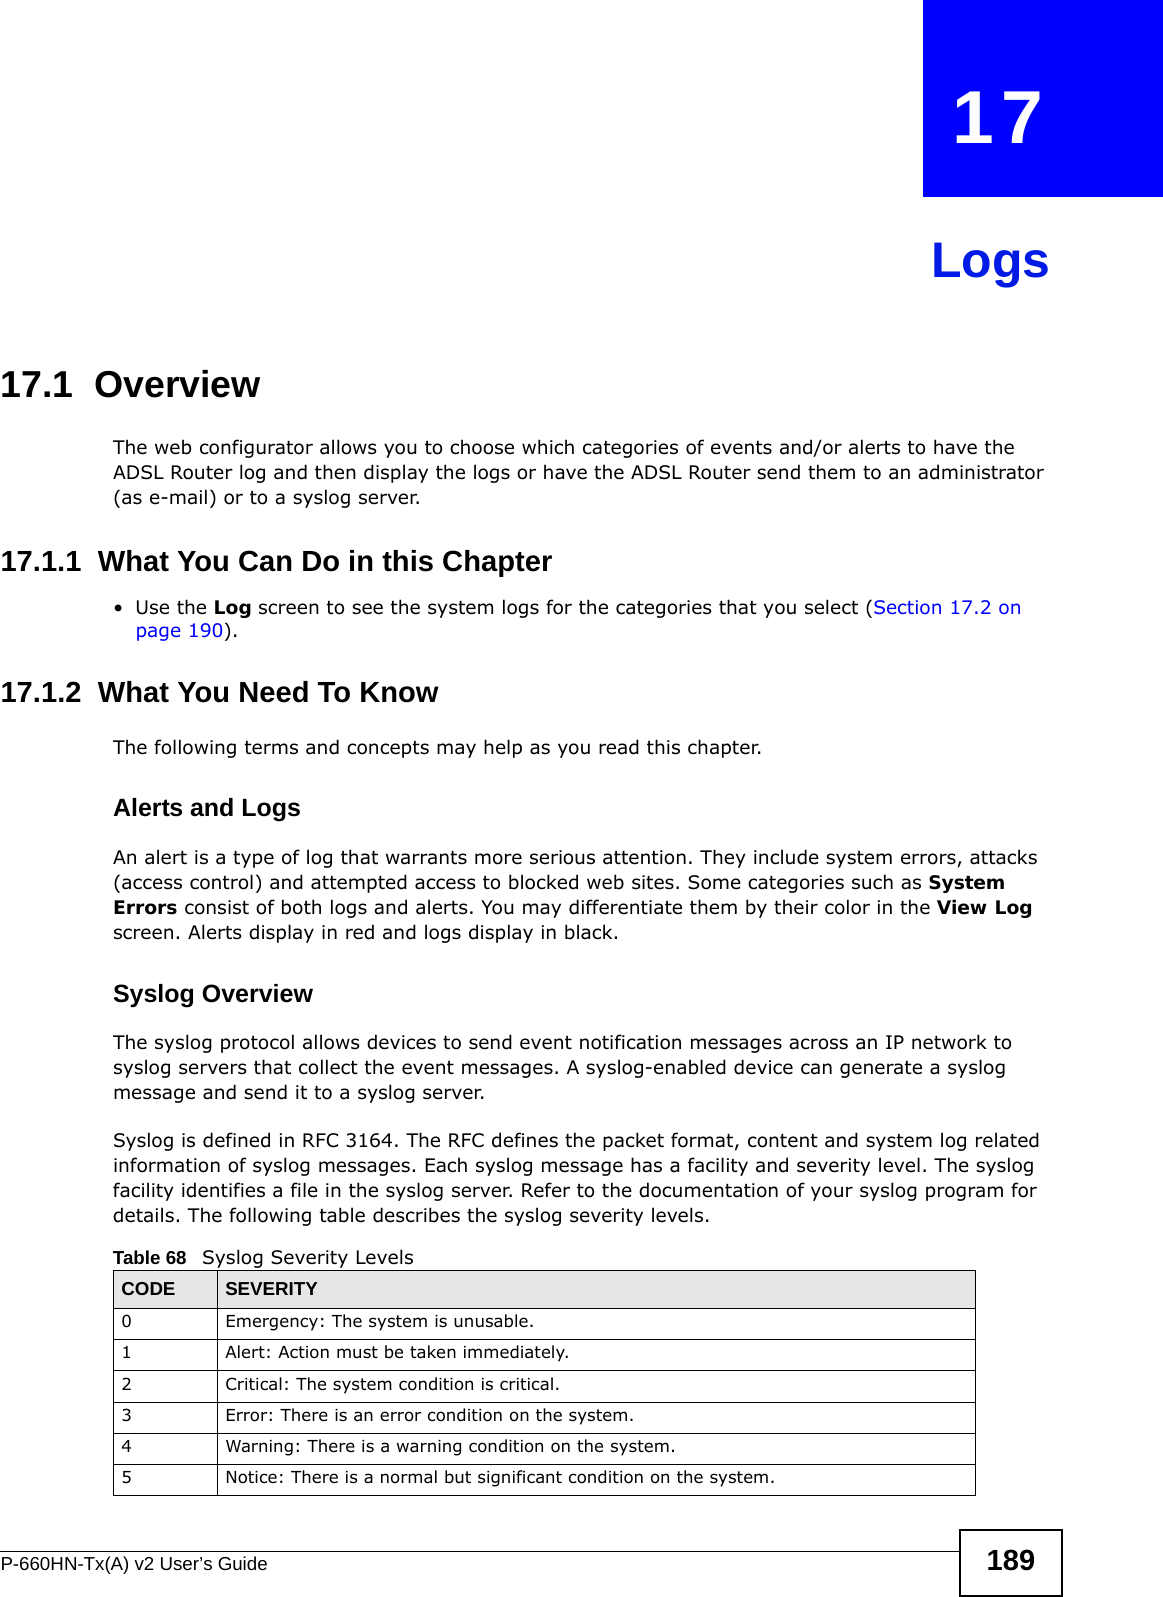 P-660HN-Tx(A) v2 User’s Guide 189CHAPTER   17Logs17.1  Overview The web configurator allows you to choose which categories of events and/or alerts to have the ADSL Router log and then display the logs or have the ADSL Router send them to an administrator (as e-mail) or to a syslog server. 17.1.1  What You Can Do in this Chapter•Use the Log screen to see the system logs for the categories that you select (Section 17.2 on page 190).17.1.2  What You Need To KnowThe following terms and concepts may help as you read this chapter.Alerts and LogsAn alert is a type of log that warrants more serious attention. They include system errors, attacks (access control) and attempted access to blocked web sites. Some categories such as System Errors consist of both logs and alerts. You may differentiate them by their color in the View Log screen. Alerts display in red and logs display in black.Syslog Overview The syslog protocol allows devices to send event notification messages across an IP network to syslog servers that collect the event messages. A syslog-enabled device can generate a syslog message and send it to a syslog server.Syslog is defined in RFC 3164. The RFC defines the packet format, content and system log related information of syslog messages. Each syslog message has a facility and severity level. The syslog facility identifies a file in the syslog server. Refer to the documentation of your syslog program for details. The following table describes the syslog severity levels. Table 68   Syslog Severity LevelsCODE SEVERITY0 Emergency: The system is unusable.1 Alert: Action must be taken immediately.2 Critical: The system condition is critical.3 Error: There is an error condition on the system.4 Warning: There is a warning condition on the system.5 Notice: There is a normal but significant condition on the system.